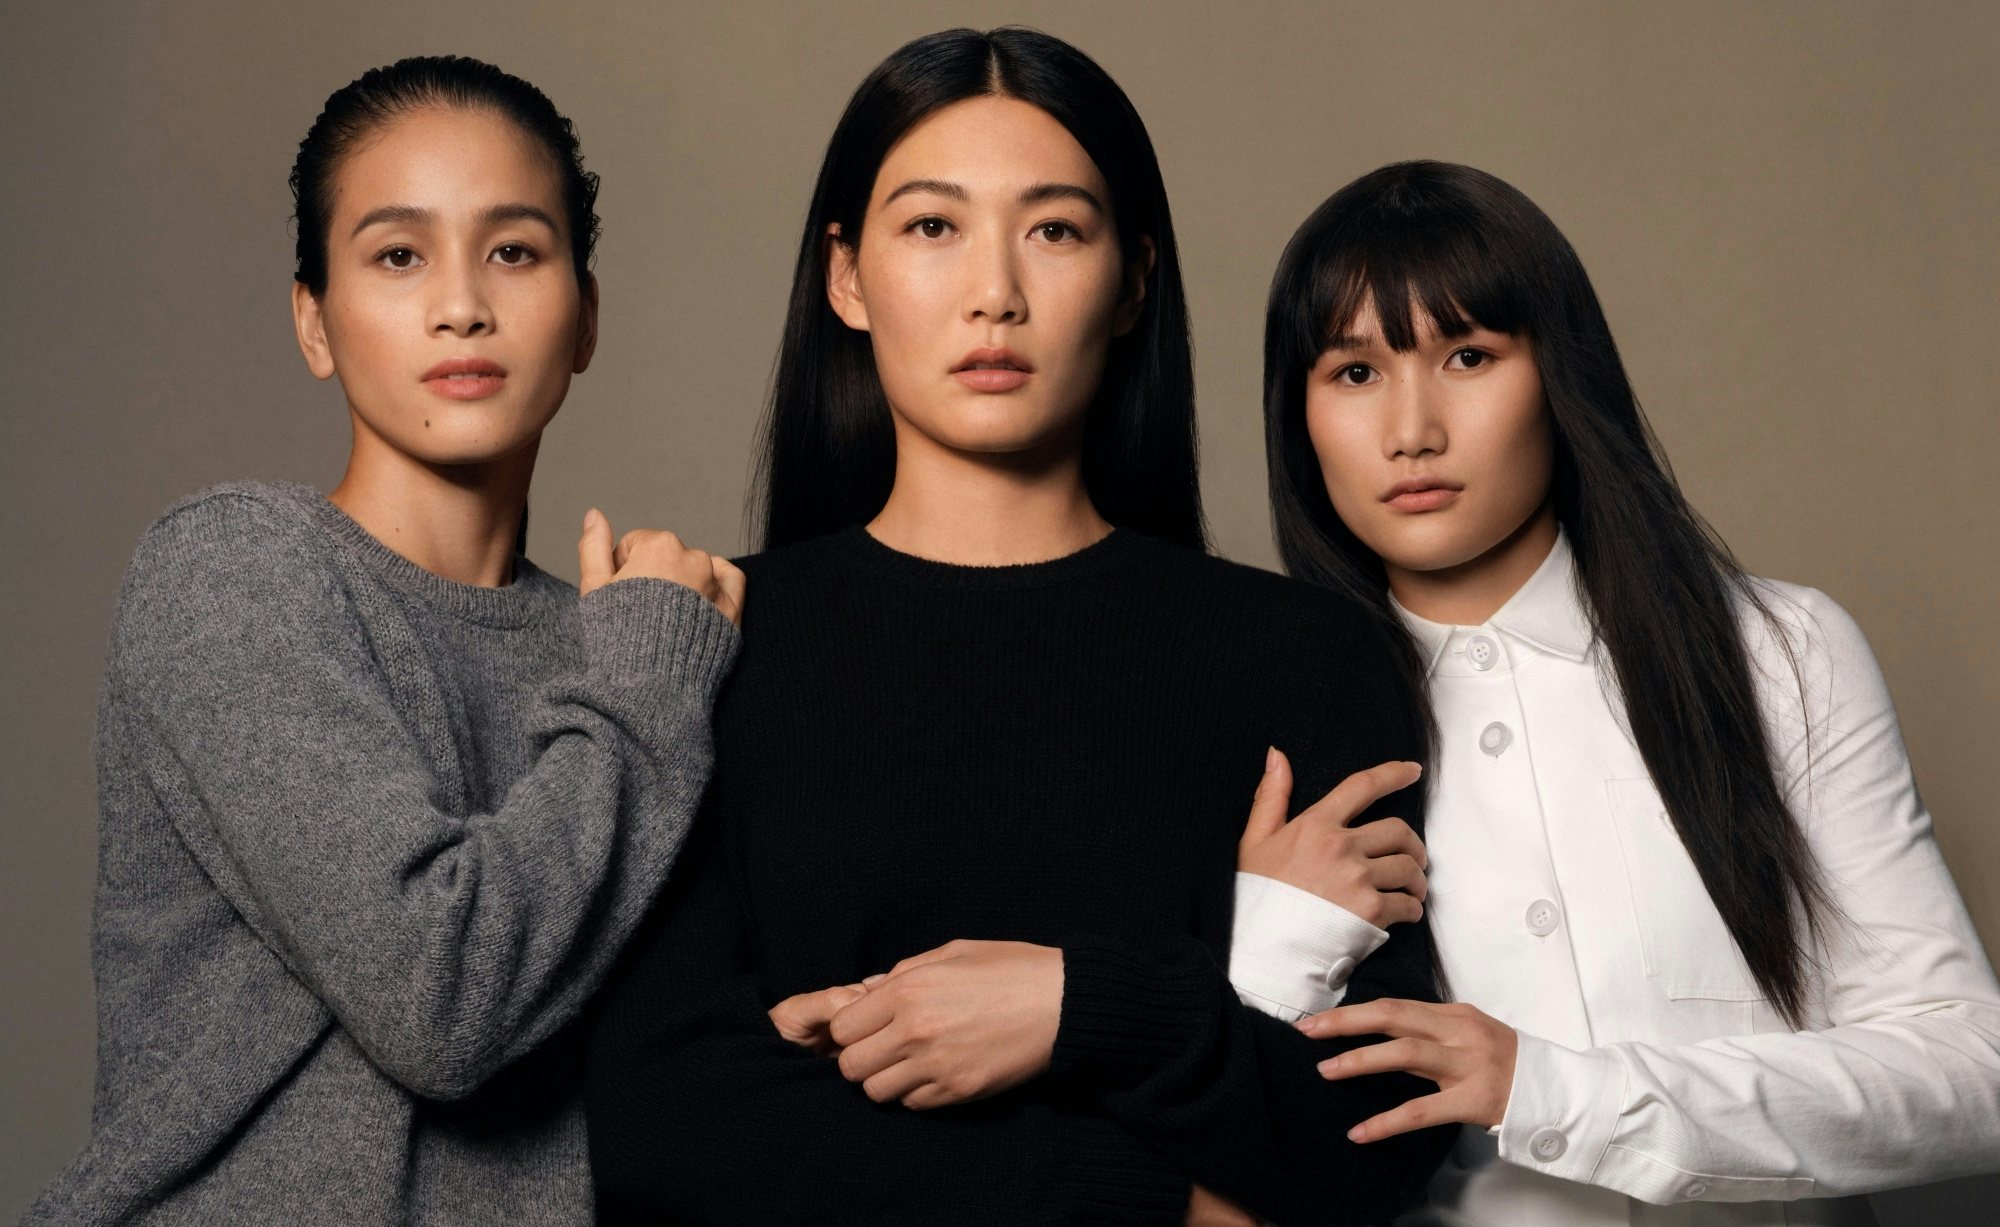 Prada is bringing China's women's national football team to the forefront of cultural significance with its partnership. Photo: Prada